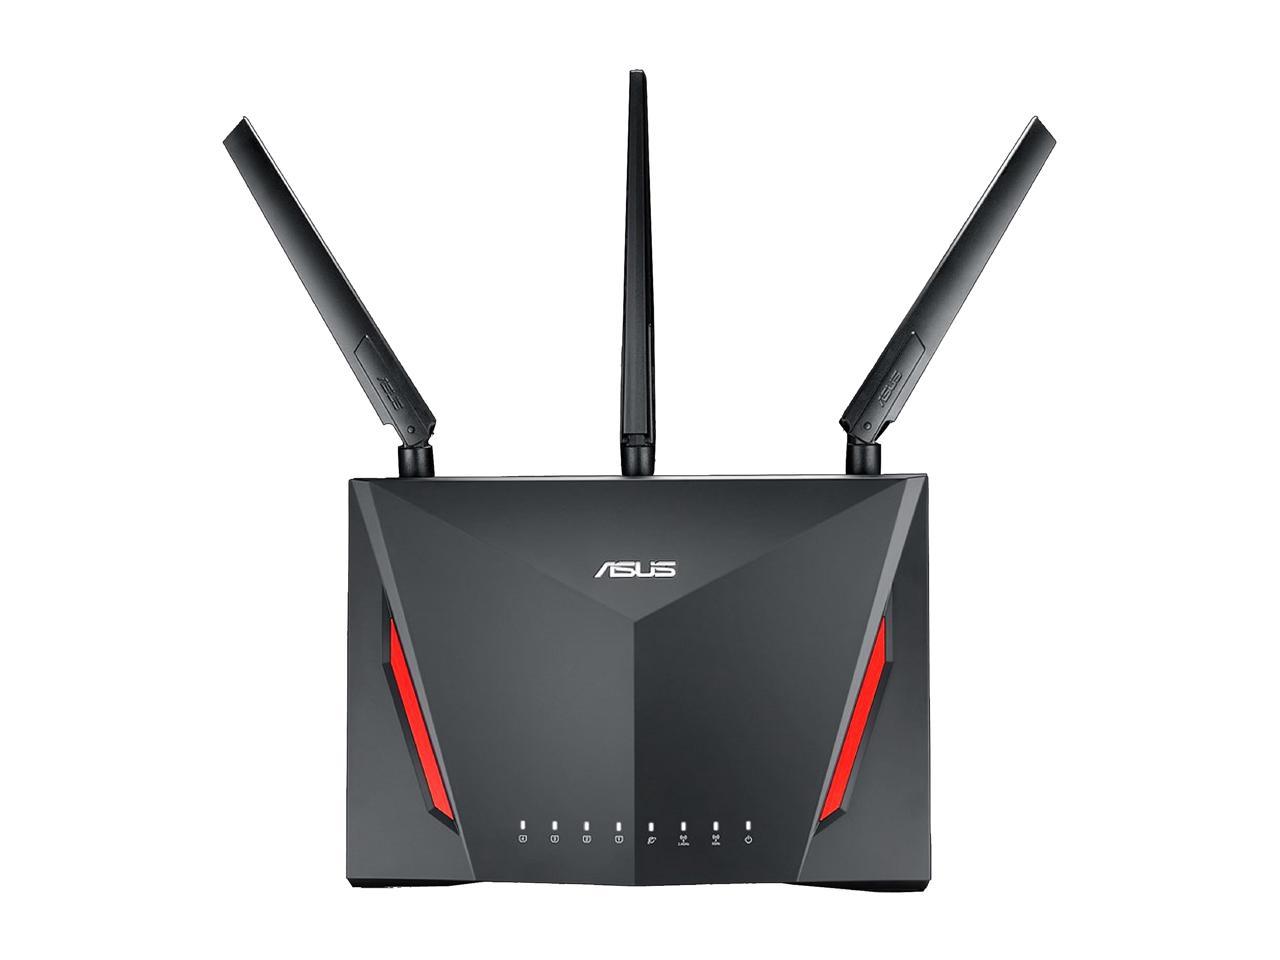 ASUS AC2900 Dual-band Gaming Router, game acceleration, Mesh Wi-Fi support, Lifetime Free Internet Security, DFS, Gamer Private Network, Port Forwarding, Streaming & Gaming (RT-AC86U) - image 2 of 7